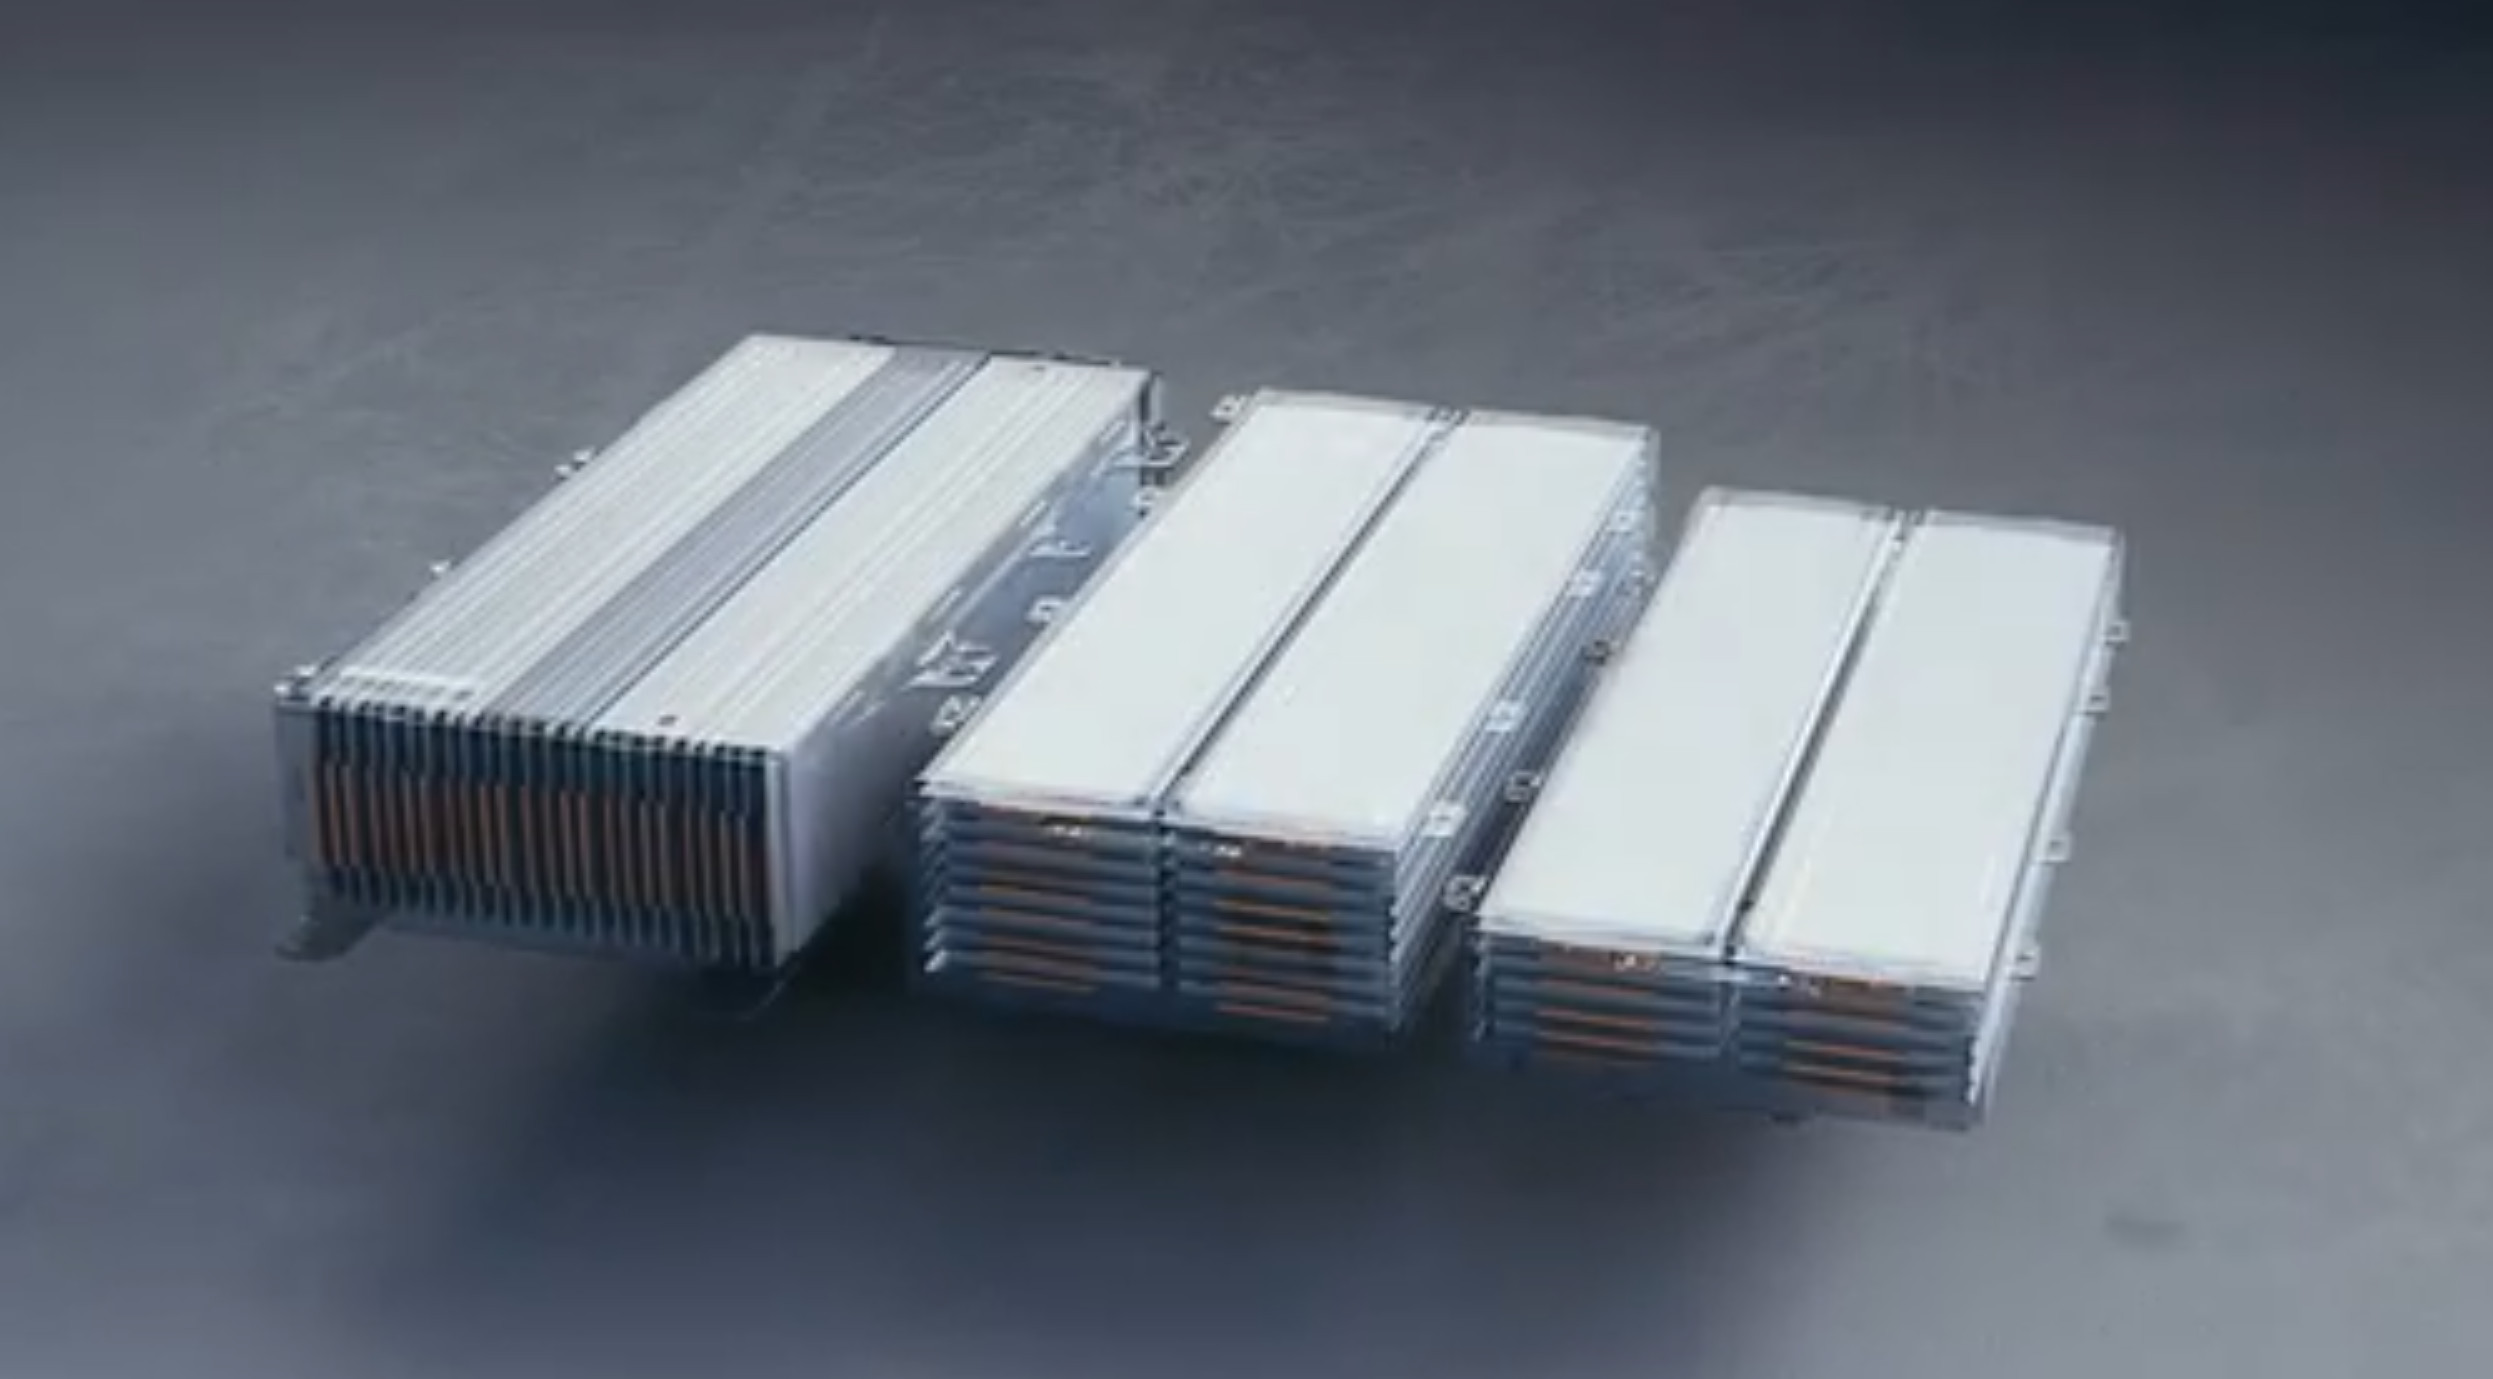 GM Ultium battery - cell stacking